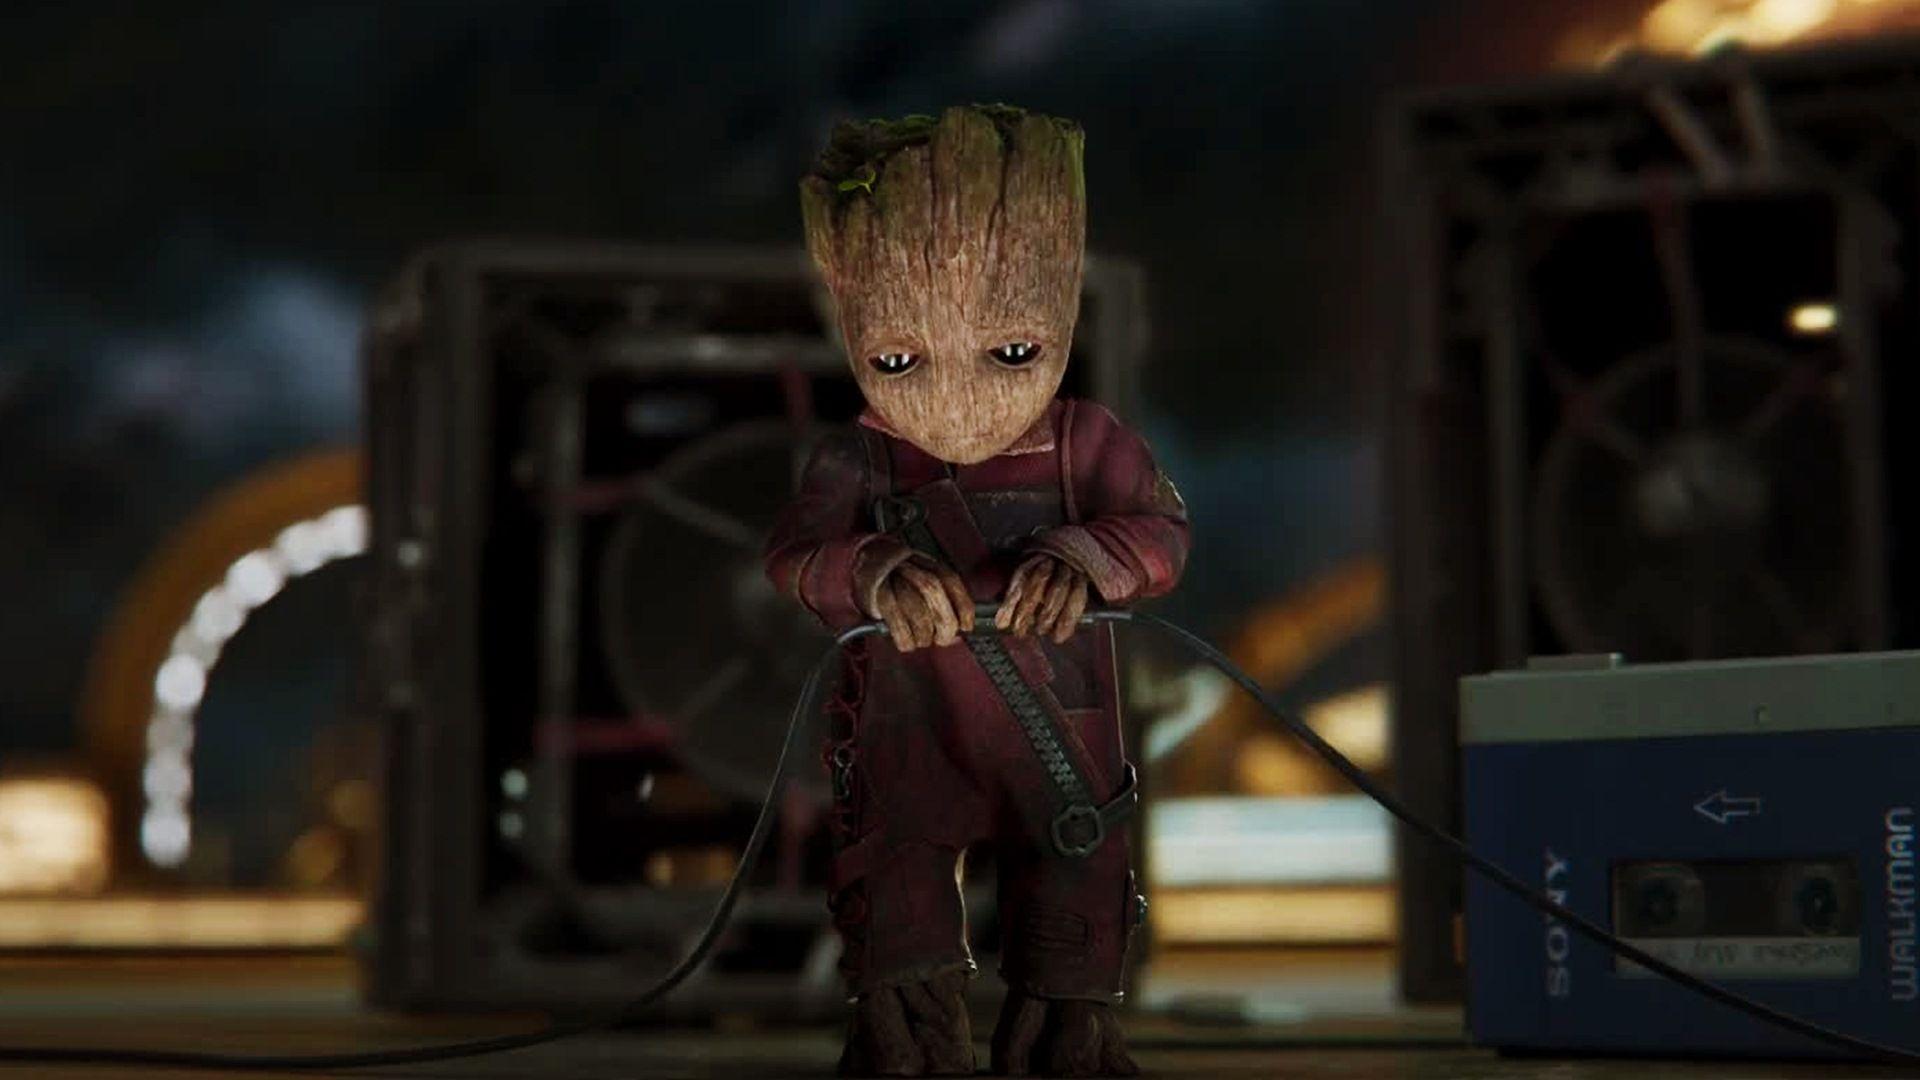 Download Baby Groot Wallpaper HD iCon Wallpaper HD. Baby groot, Guardians of the galaxy, Guardians of the galaxy vol 2